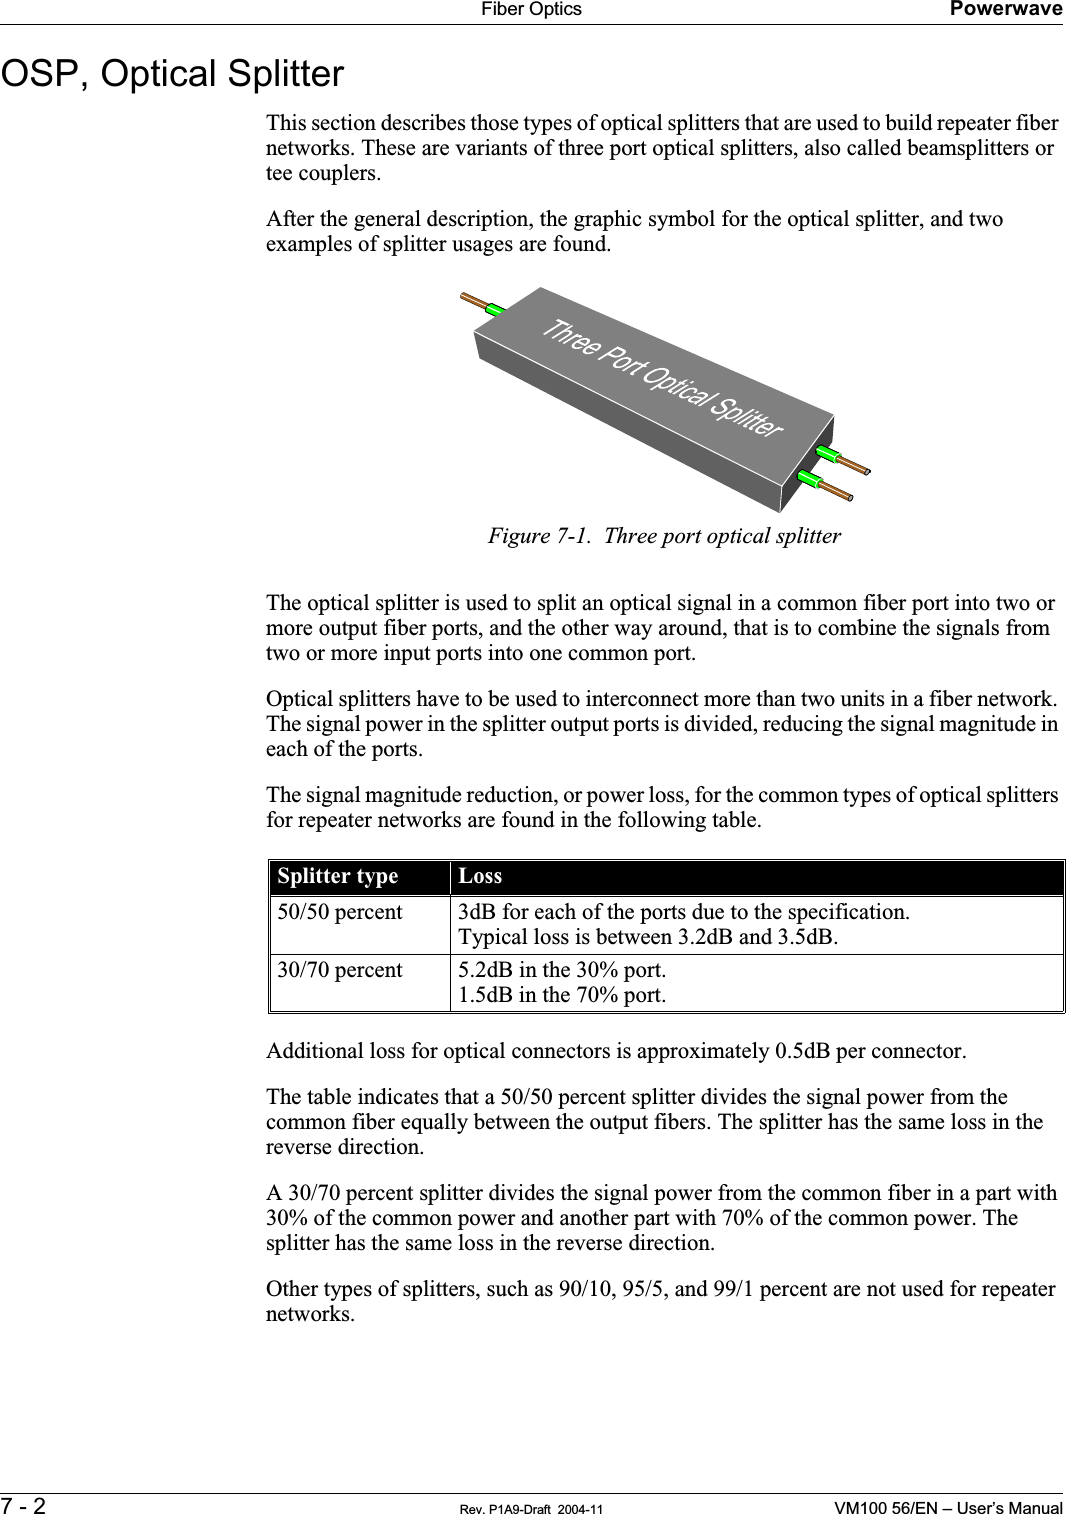 Fiber Optics Powerwave7 - 2 Rev. P1A9-Draft  2004-11 VM100 56/EN – User’s ManualOSP, Optical Splitter        This section describes those types of optical splitters that are used to build repeater fiber networks. These are variants of three port optical splitters, also called beamsplitters or tee couplers.After the general description, the graphic symbol for the optical splitter, and two examples of splitter usages are found.Figure 7-1.  Three port optical splitterThe optical splitter is used to split an optical signal in a common fiber port into two or more output fiber ports, and the other way around, that is to combine the signals from two or more input ports into one common port.Optical splitters have to be used to interconnect more than two units in a fiber network. The signal power in the splitter output ports is divided, reducing the signal magnitude in each of the ports.The signal magnitude reduction, or power loss, for the common types of optical splitters for repeater networks are found in the following table.Additional loss for optical connectors is approximately 0.5dB per connector.The table indicates that a 50/50 percent splitter divides the signal power from the common fiber equally between the output fibers. The splitter has the same loss in the reverse direction.A 30/70 percent splitter divides the signal power from the common fiber in a part with 30% of the common power and another part with 70% of the common power. The splitter has the same loss in the reverse direction.Other types of splitters, such as 90/10, 95/5, and 99/1 percent are not used for repeater networks.Splitter type Loss50/50 percent 3dB for each of the ports due to the specification.Typical loss is between 3.2dB and 3.5dB.30/70 percent 5.2dB in the 30% port.1.5dB in the 70% port.